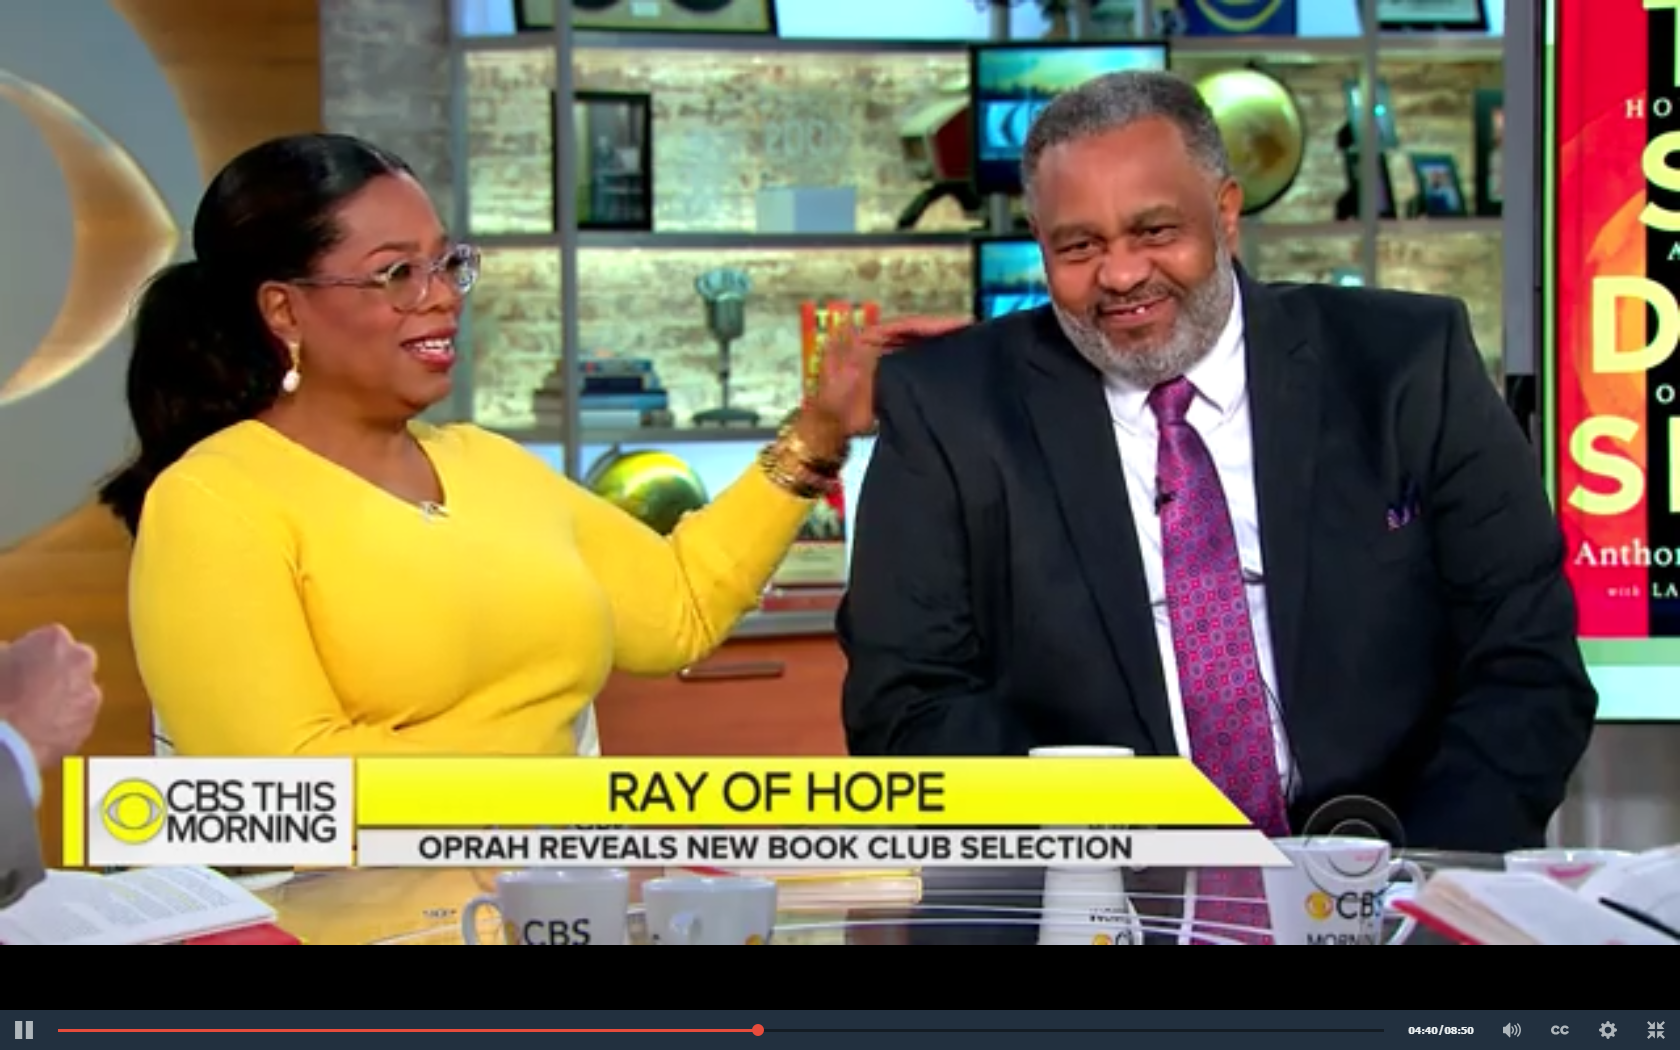 the sun does shine by anthony ray hinton